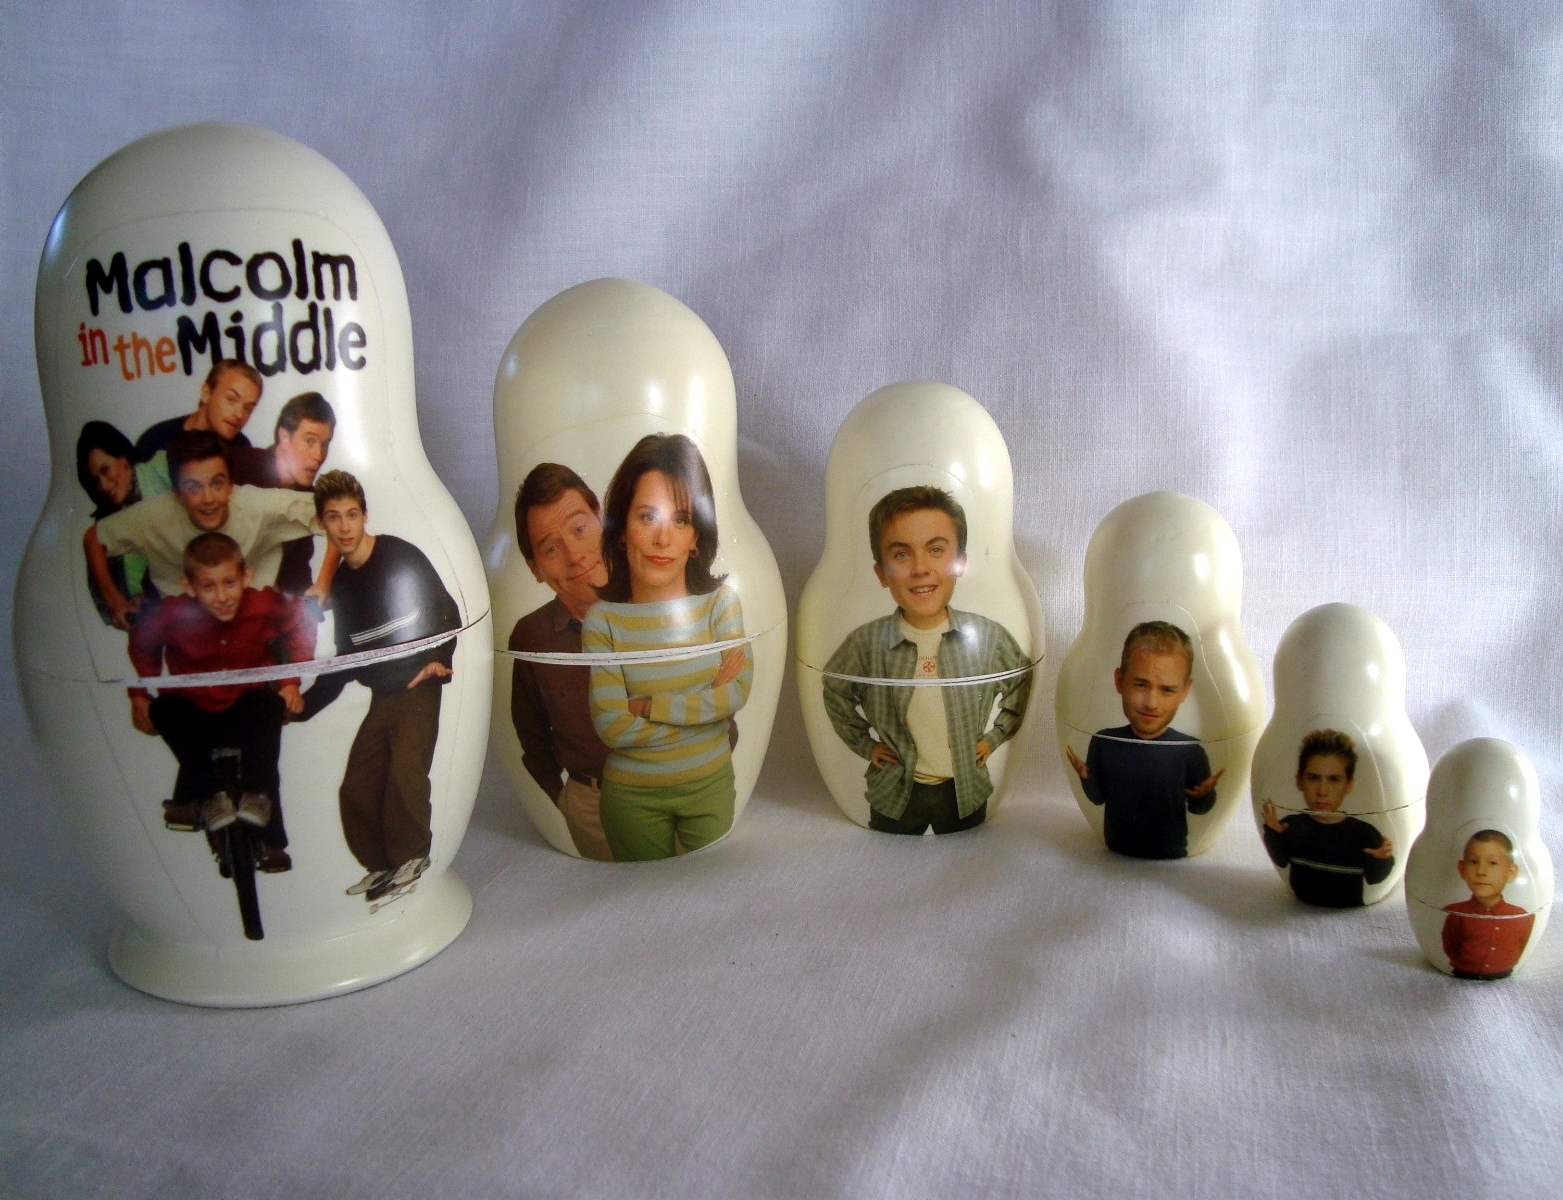 Malcolm in the Middle official Season 3 nesting dolls